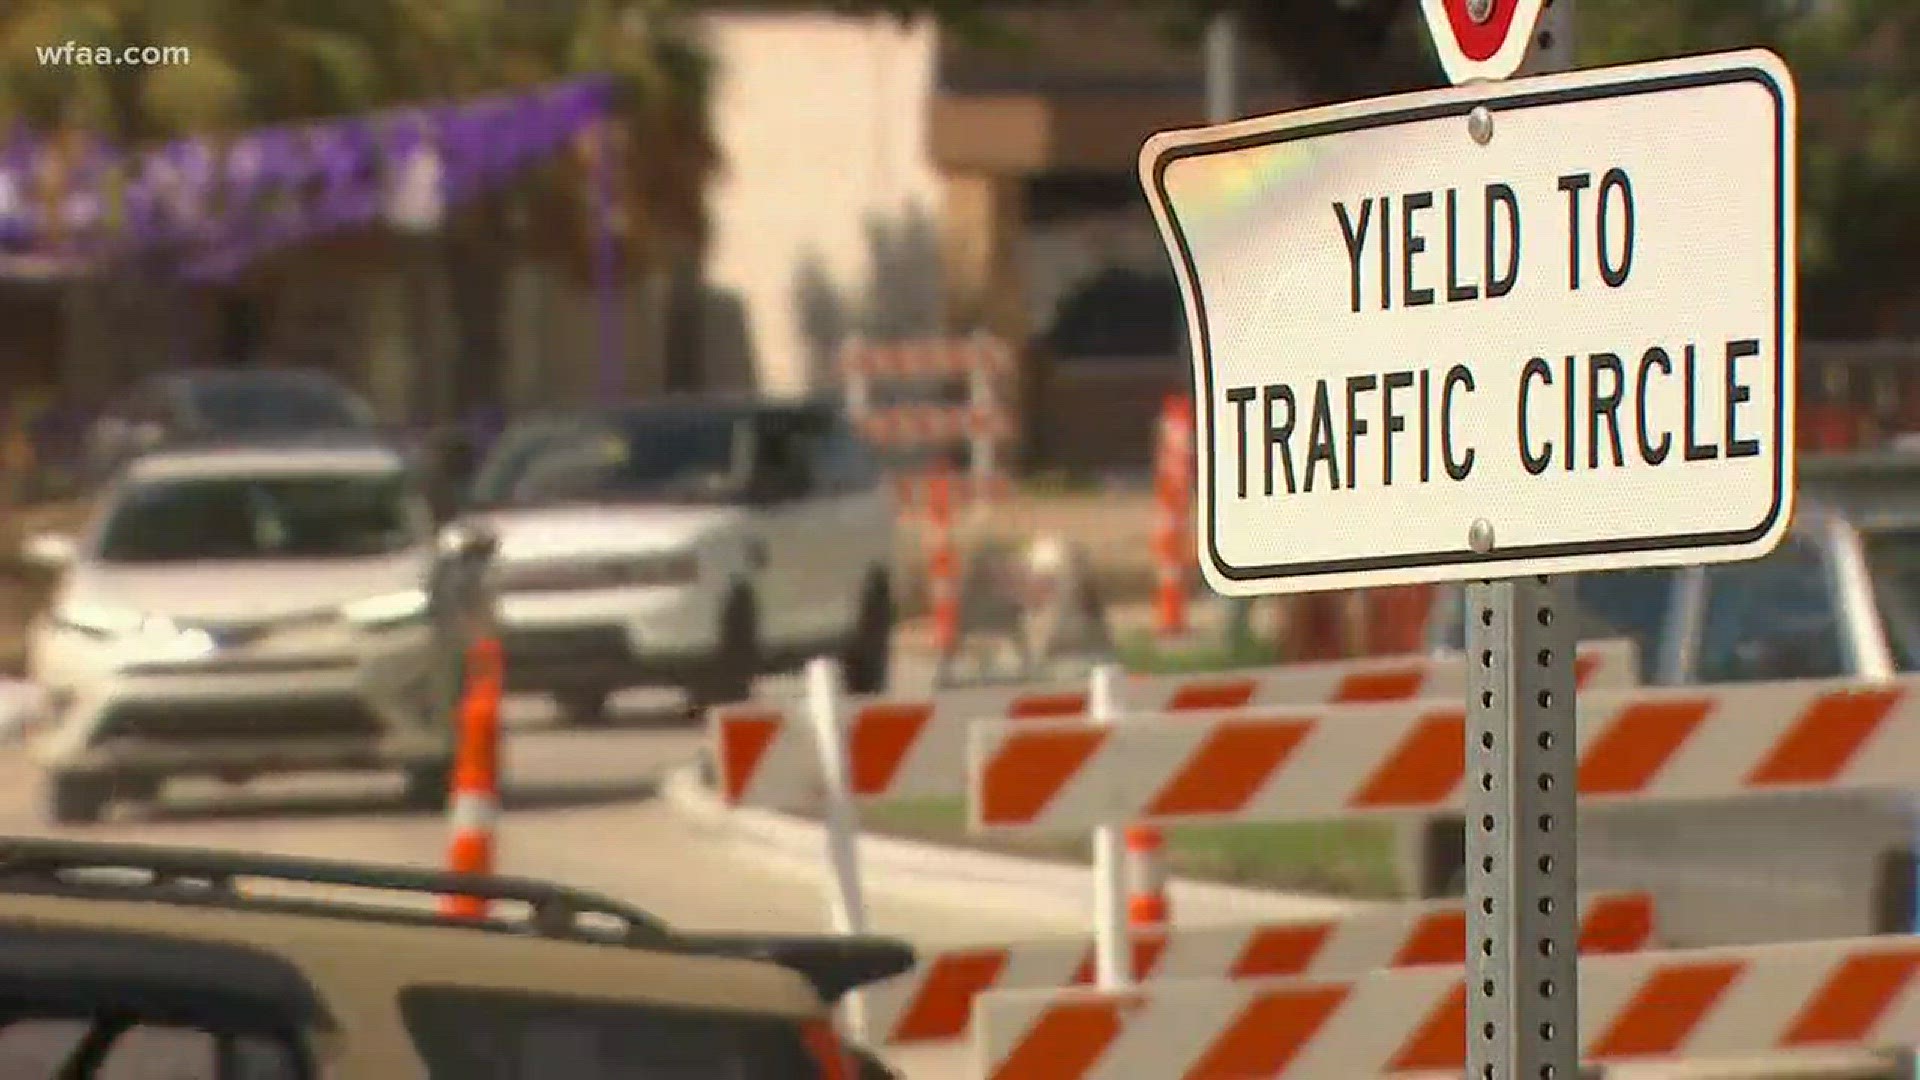 The ongoing project continues to cause parking headaches along the busy Fort Worth traffic circle.